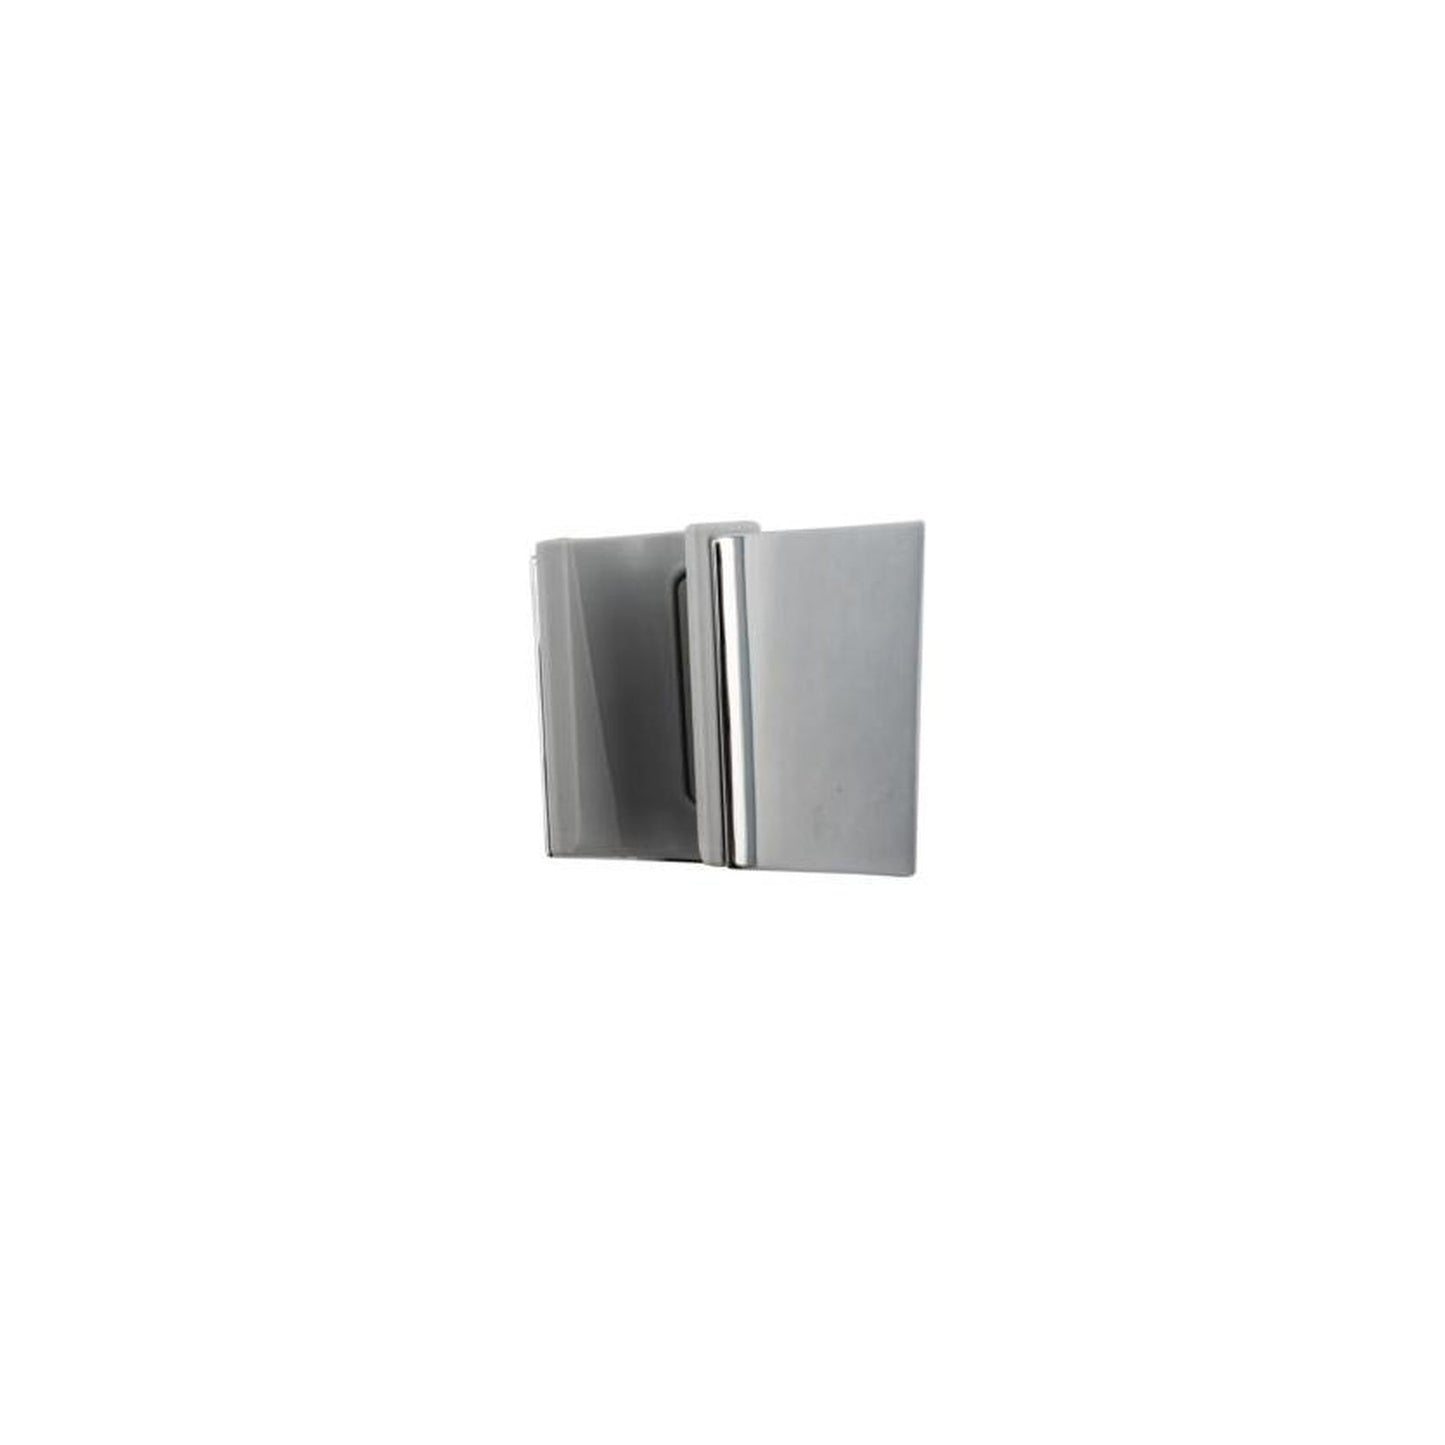 Toto Wall Mount, Square Handshower Polished Nickel